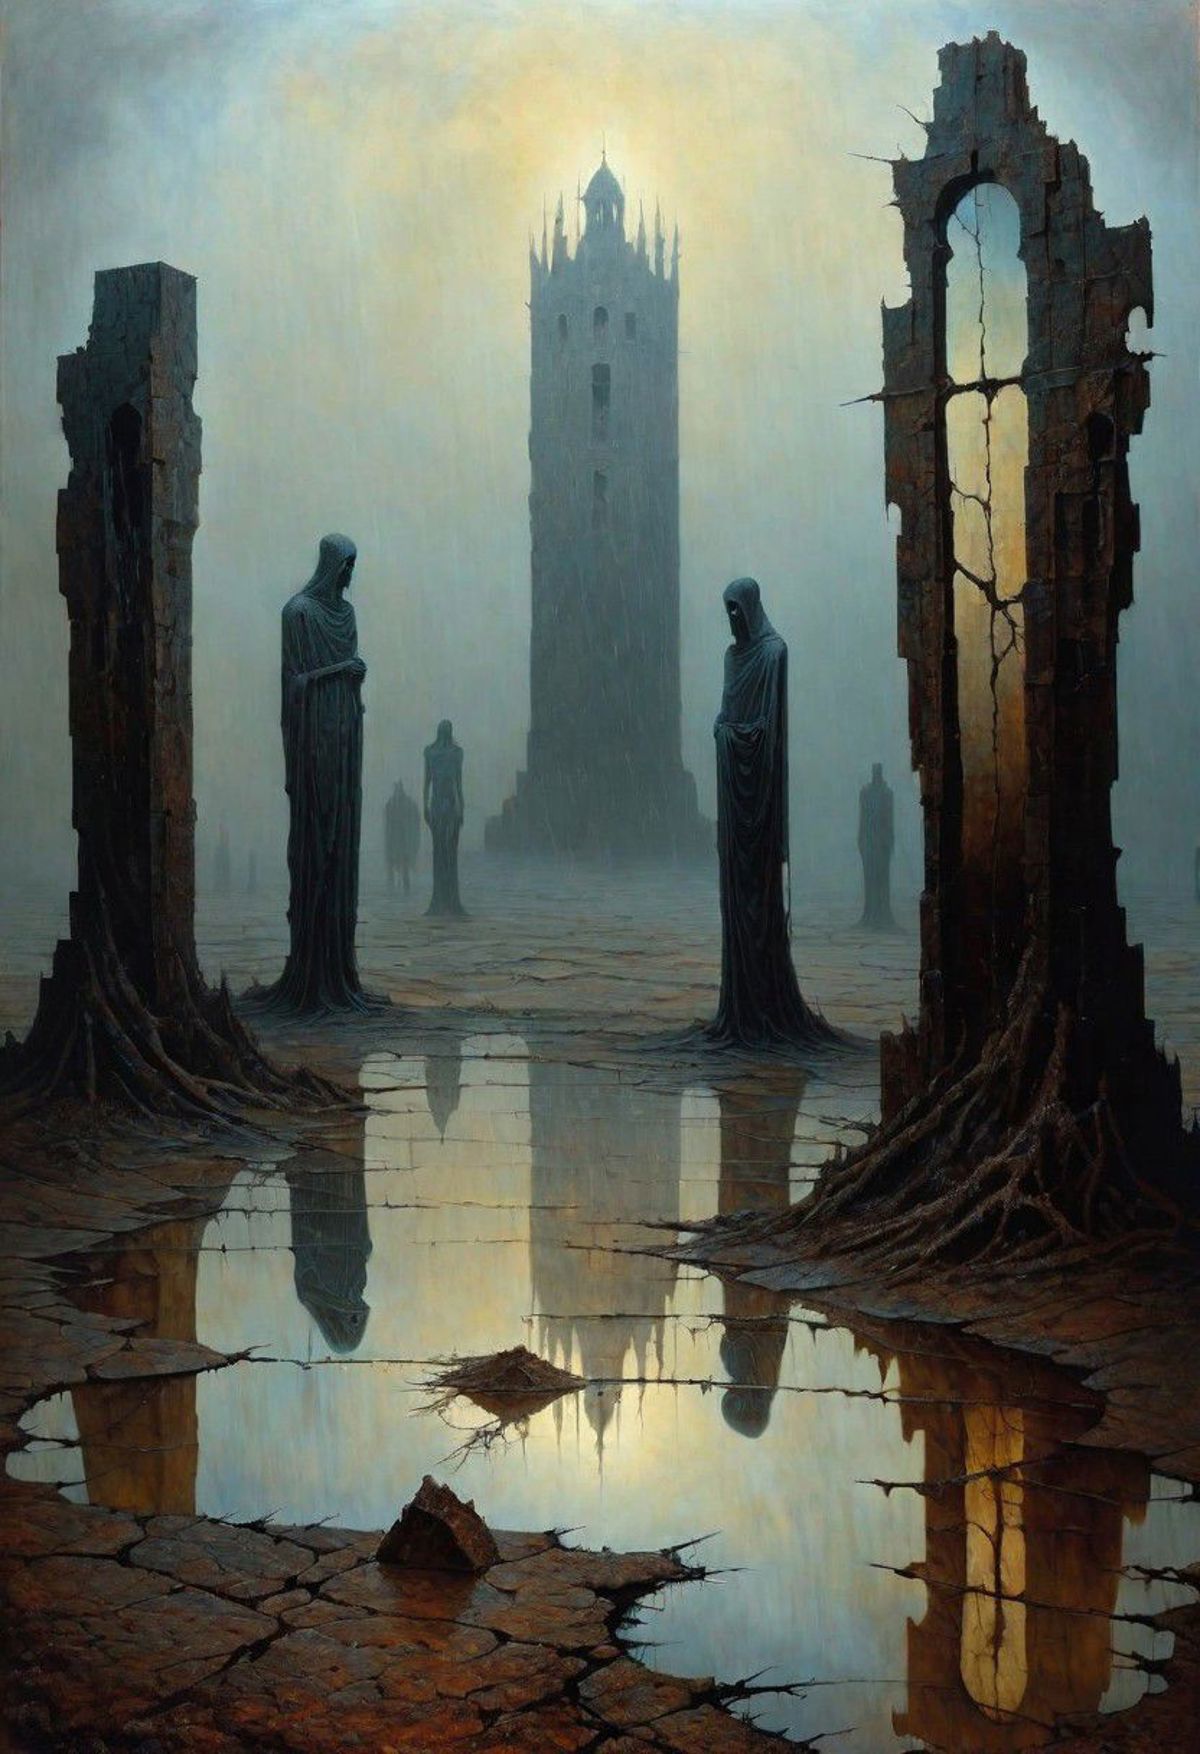 Dark and eerie scene of three statues in a deserted area with a mysterious tower in the background.